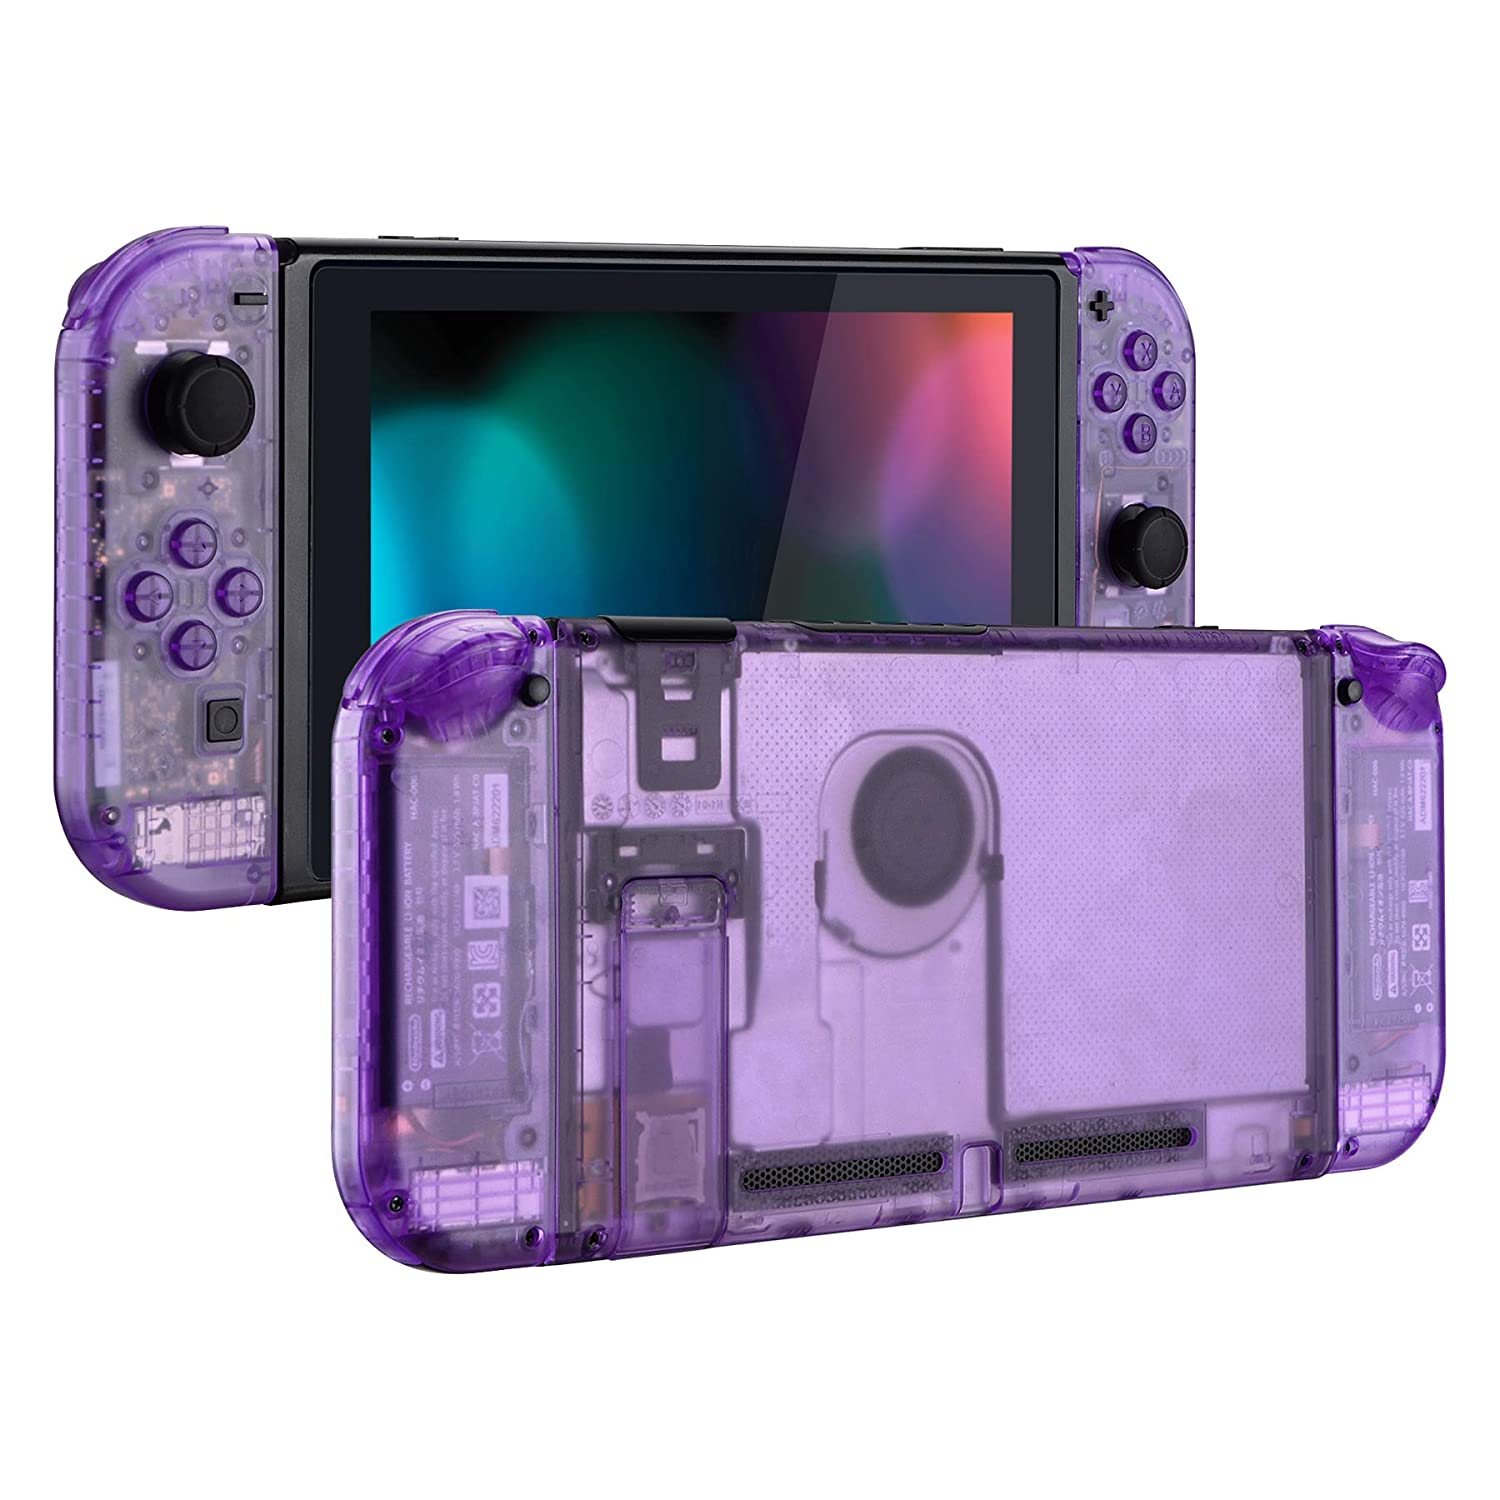 Extremerate Clear Atomic Purple Backplate And Joycon Shells Product Shot